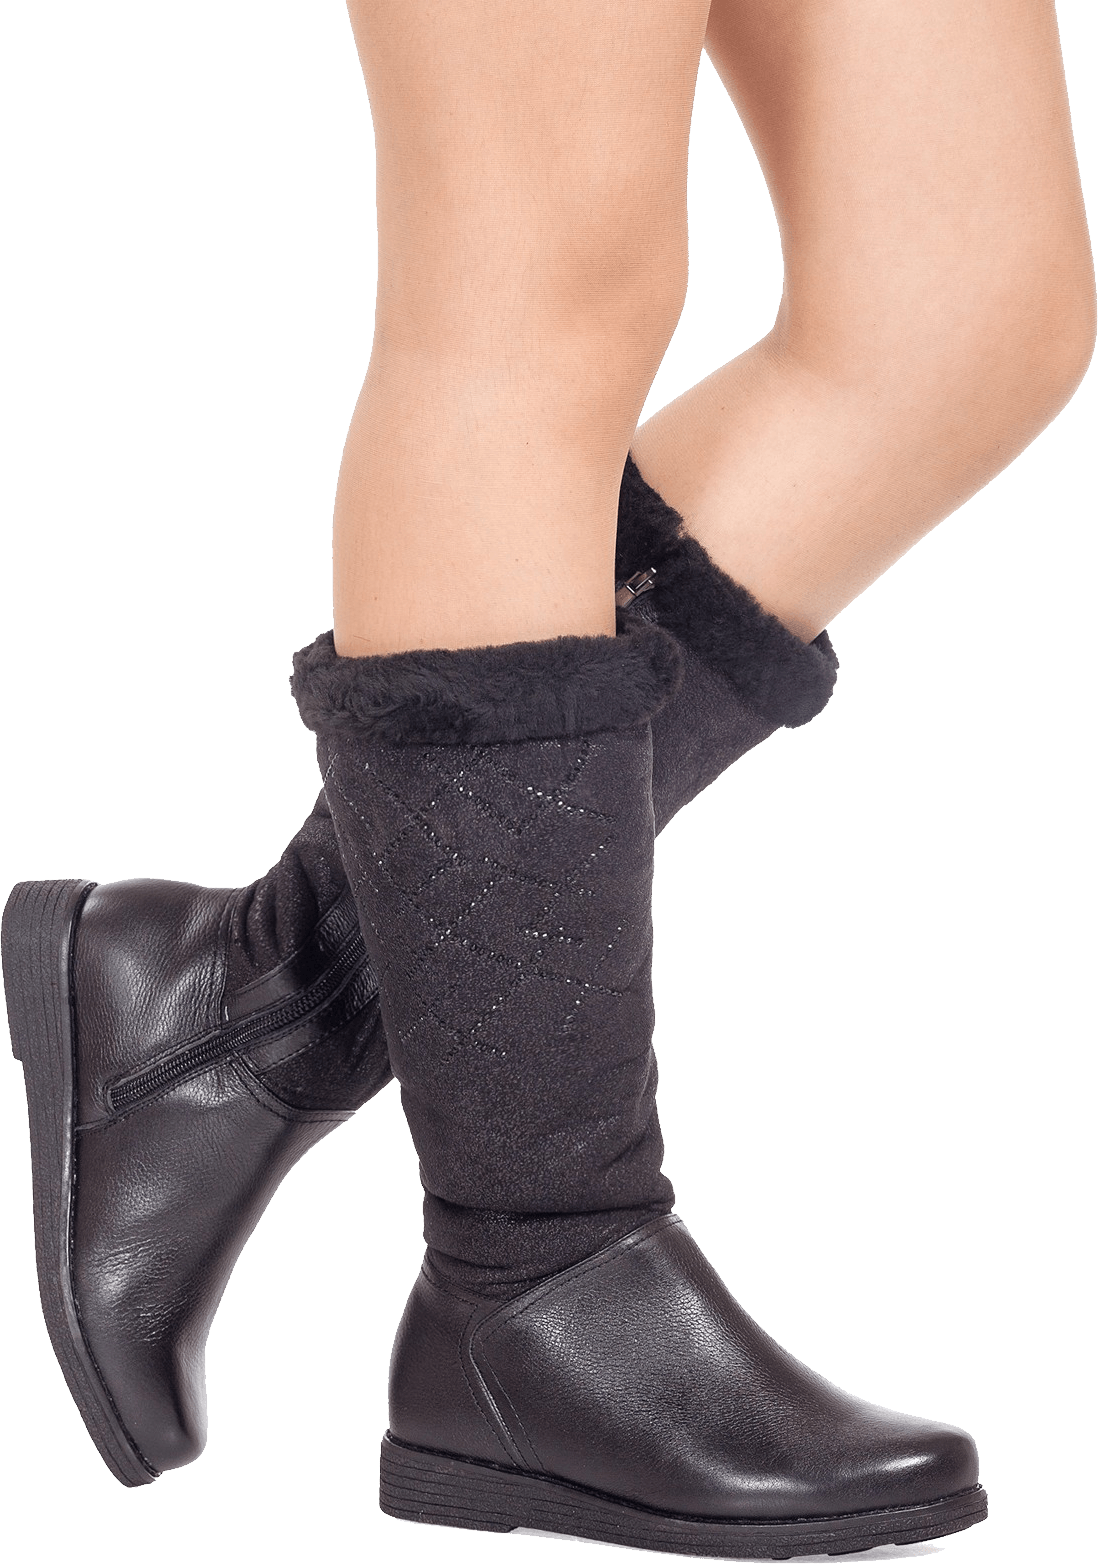 Boots On Legs Png Image PNG Image